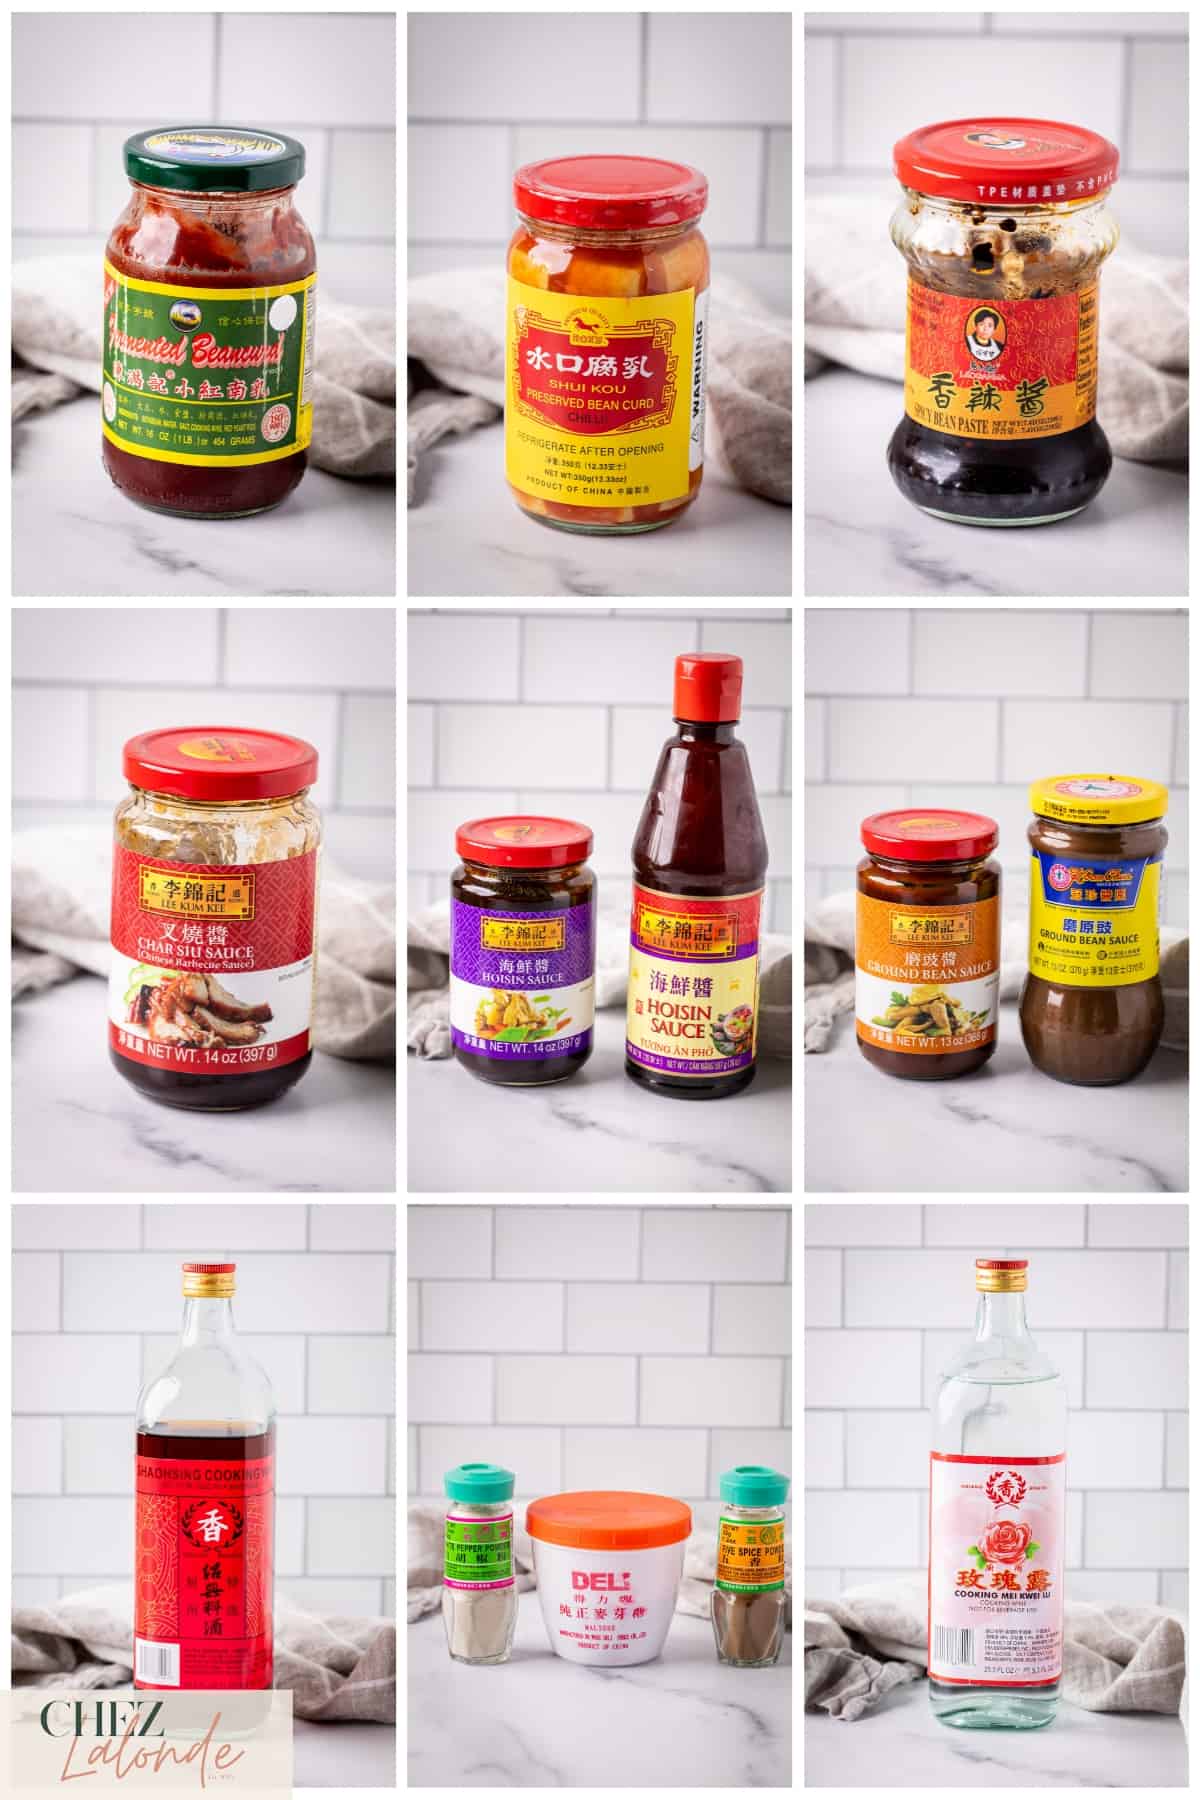 Second group of 9 different Chinese condiments and sauces that were showcasing in this post.